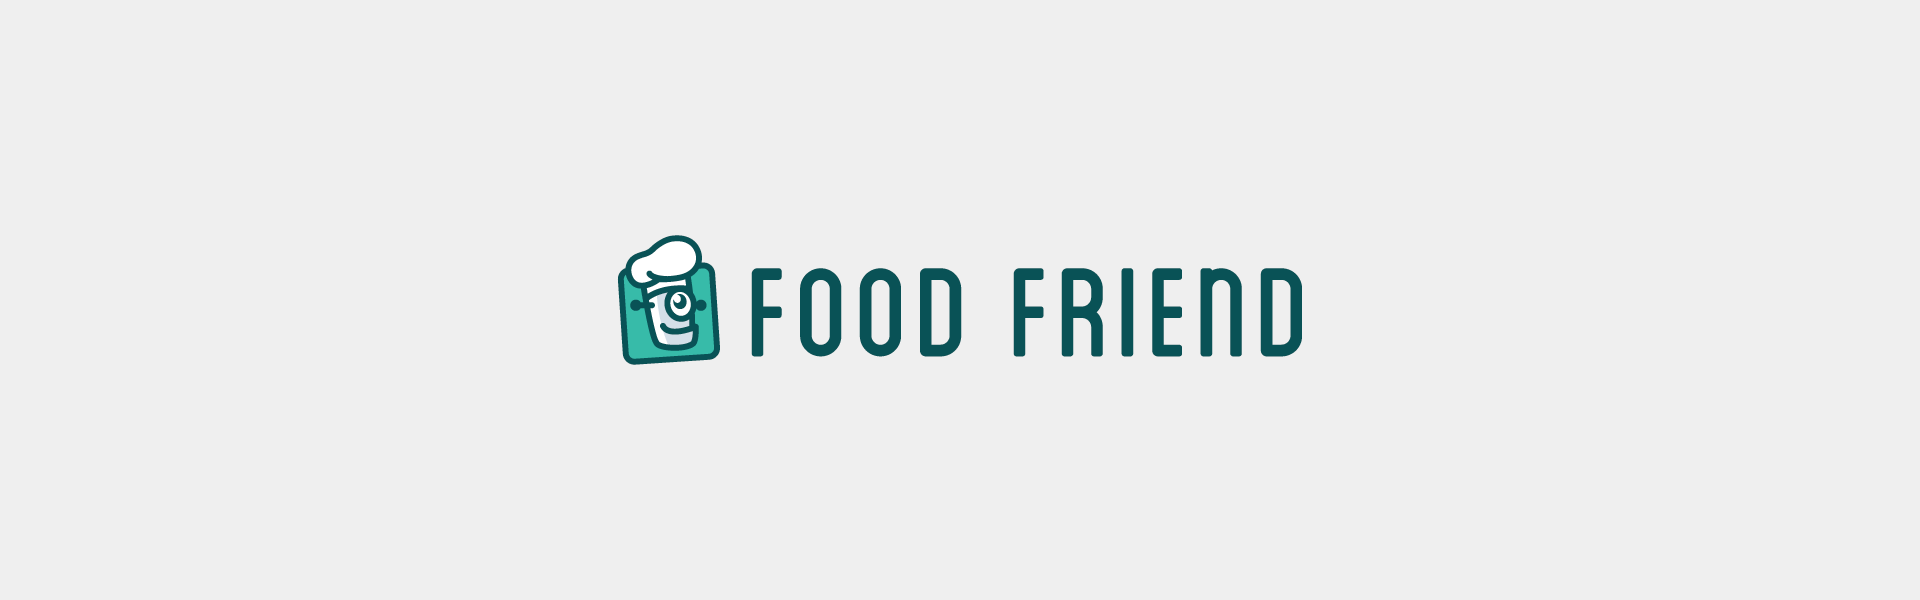 Logo of "Food Friend" featuring a stylized graphic of a smiling food container with a chef's hat, set against a plain background.